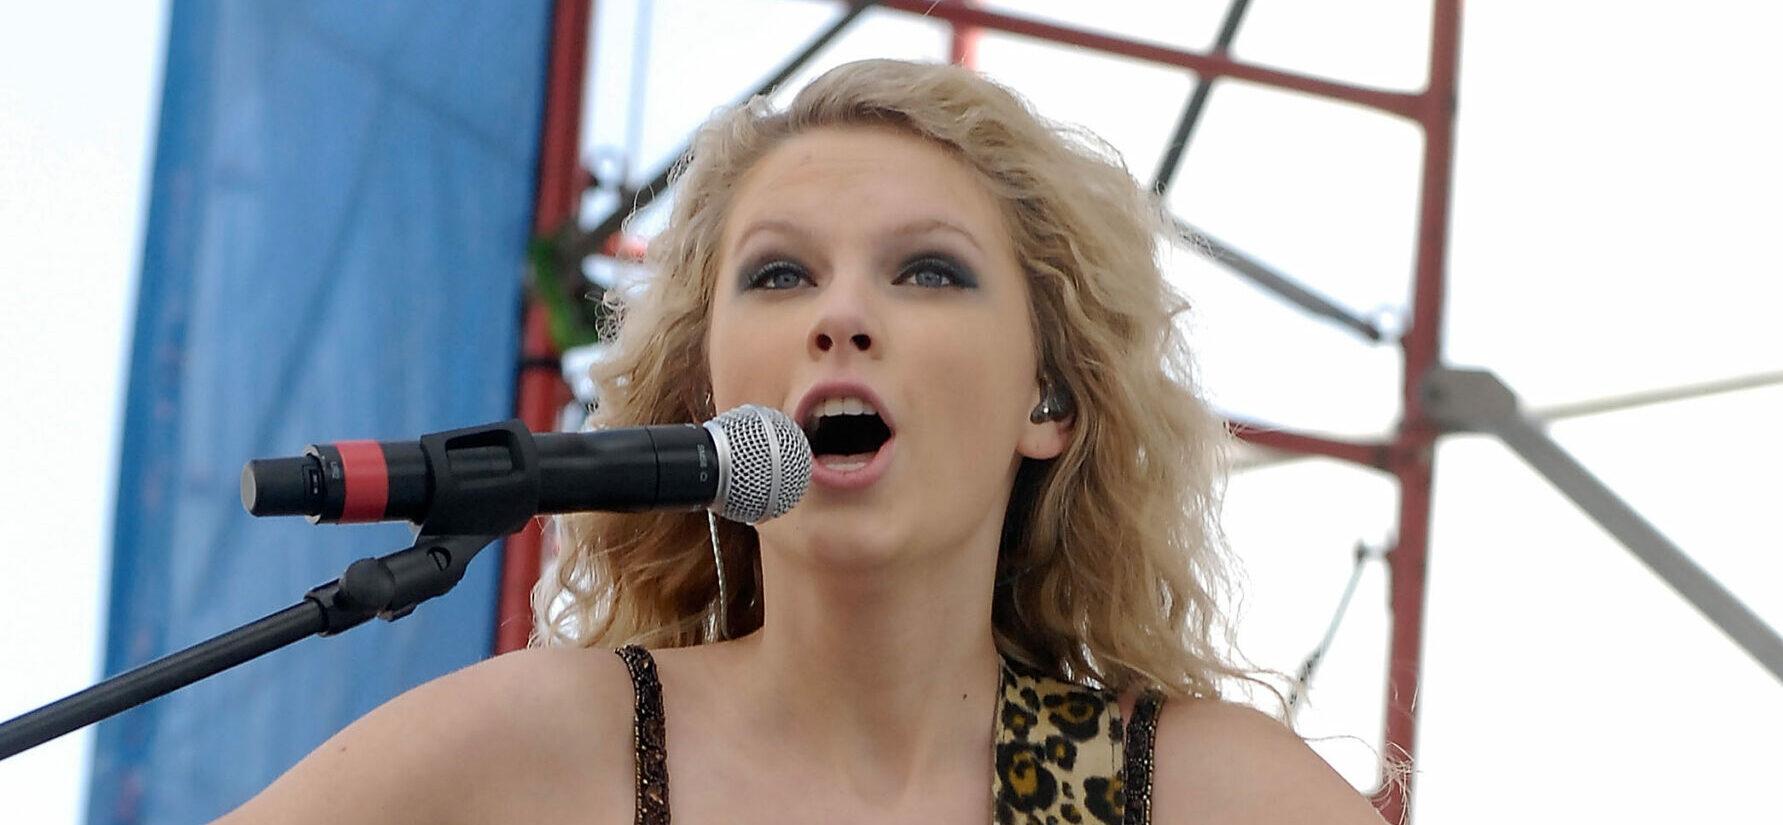 Taylor Swift performs live earlier in her career at KISS Country Chili Cookoff 2008 in Pembroke Pines Florida